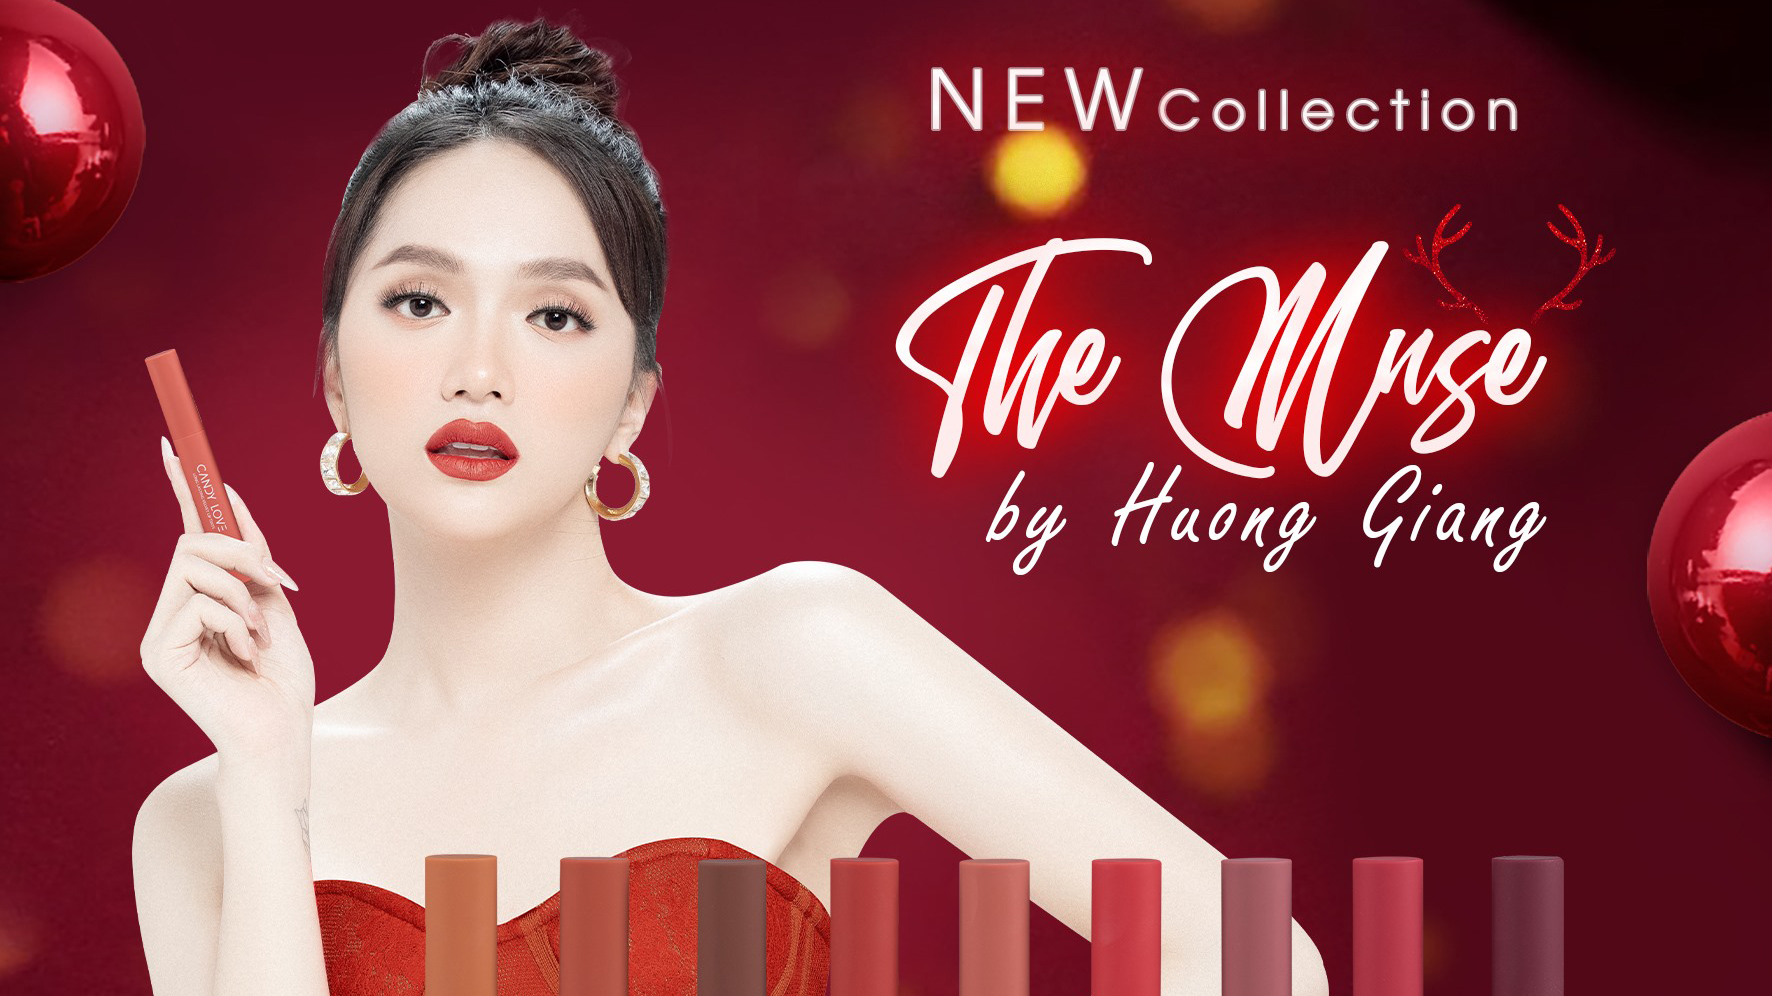 NEW COLLECTION - The Muse By Huong Giang